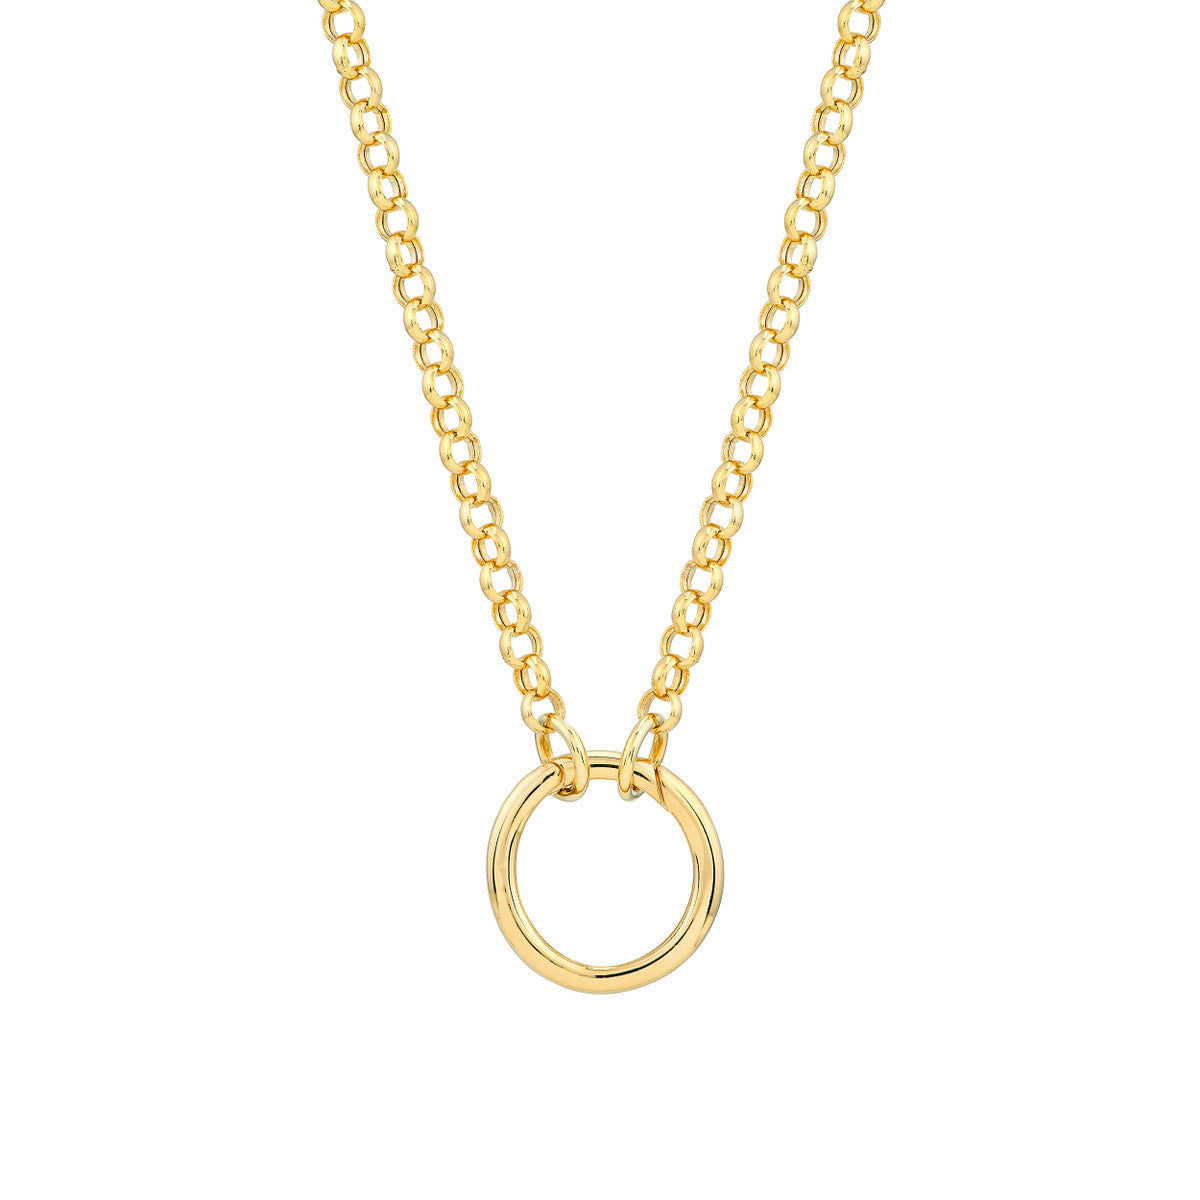 Rolo Chain with Round Charm Clasp